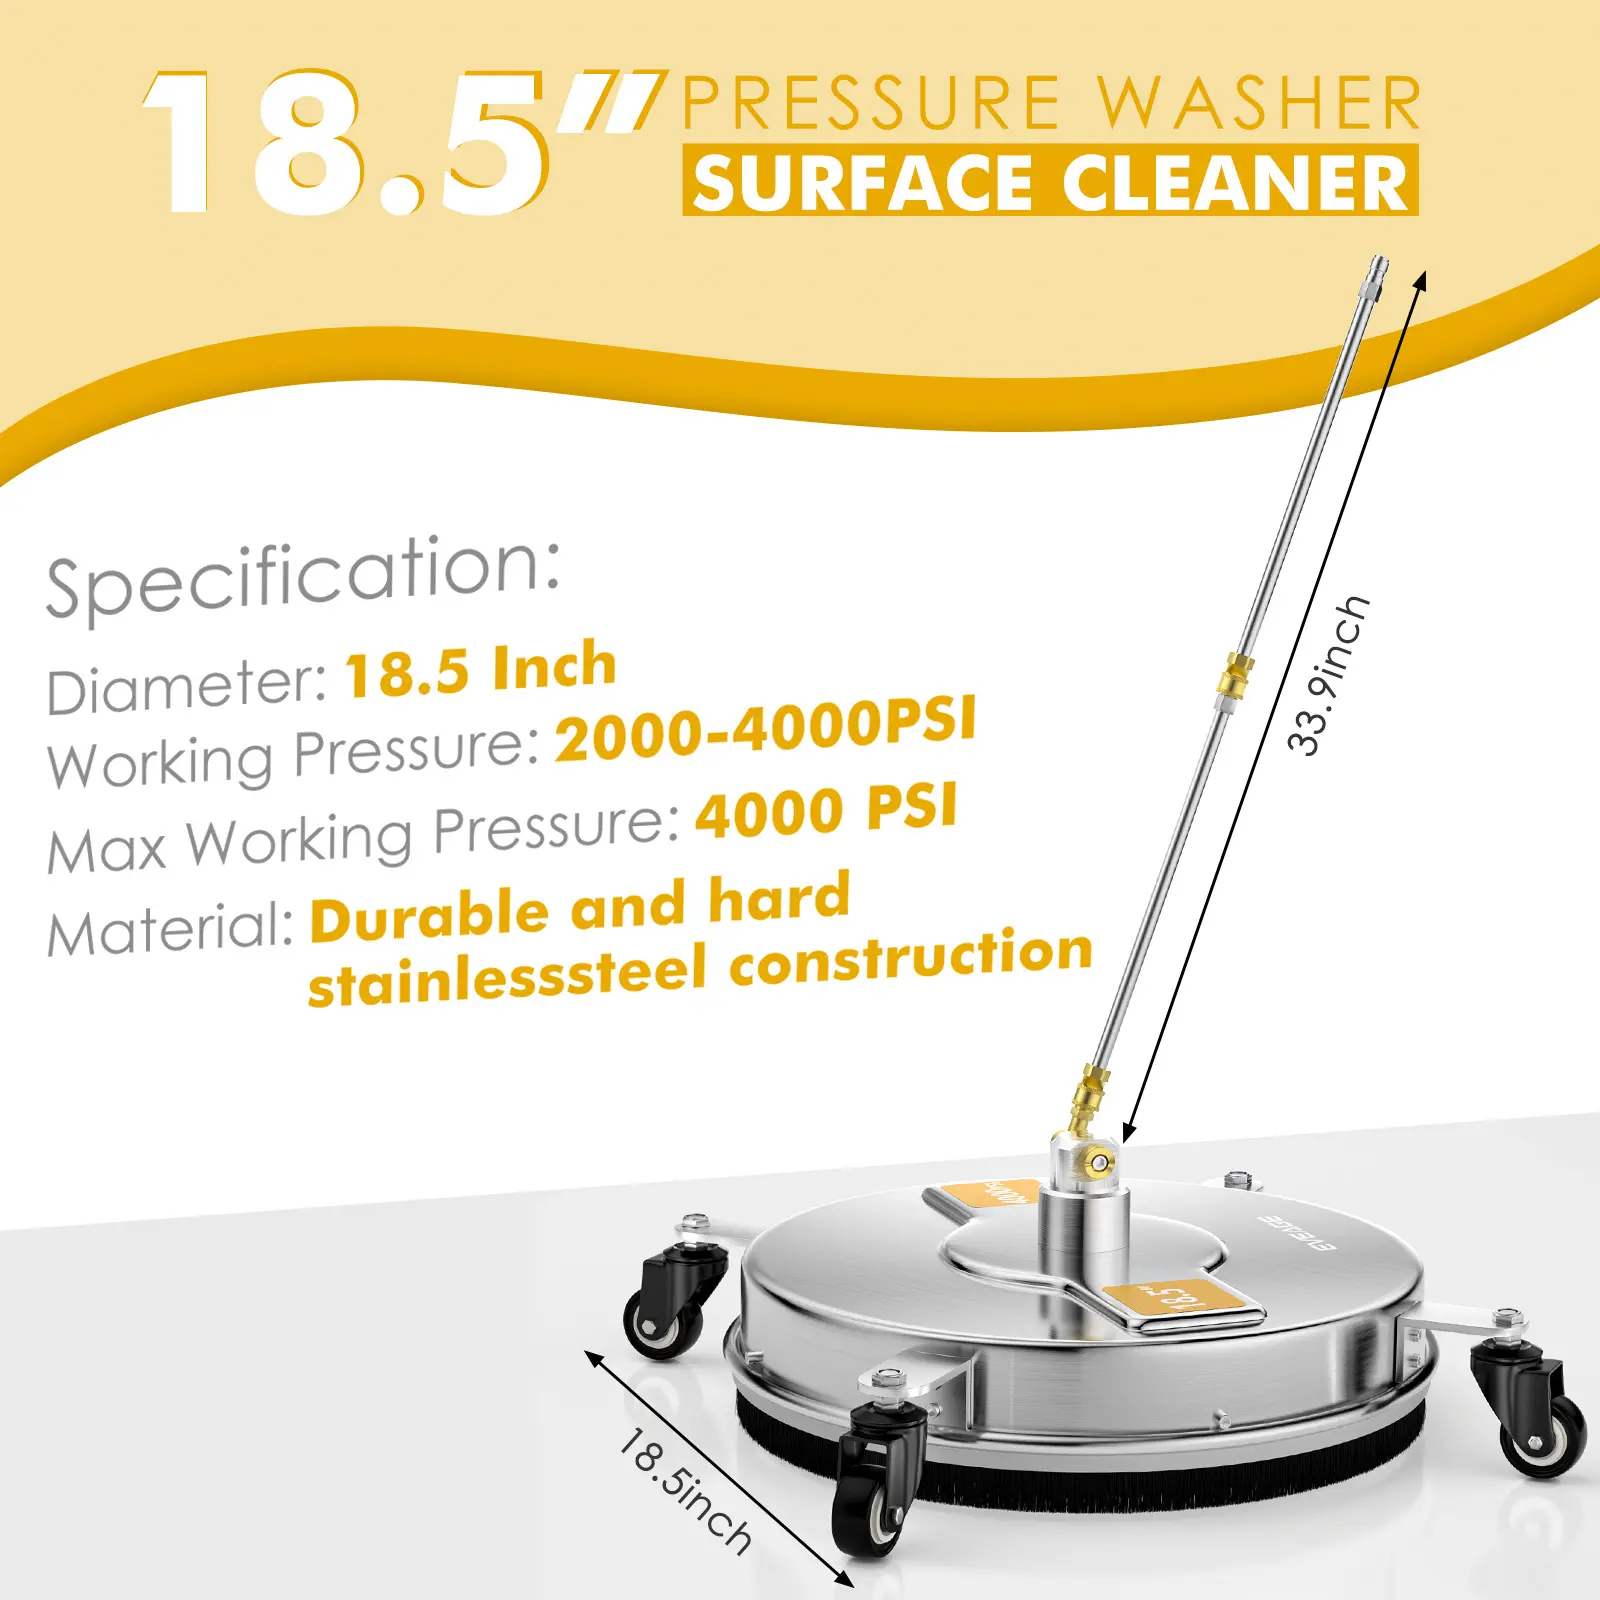 Eveage 18.5 inch pressure washer surface cleaner